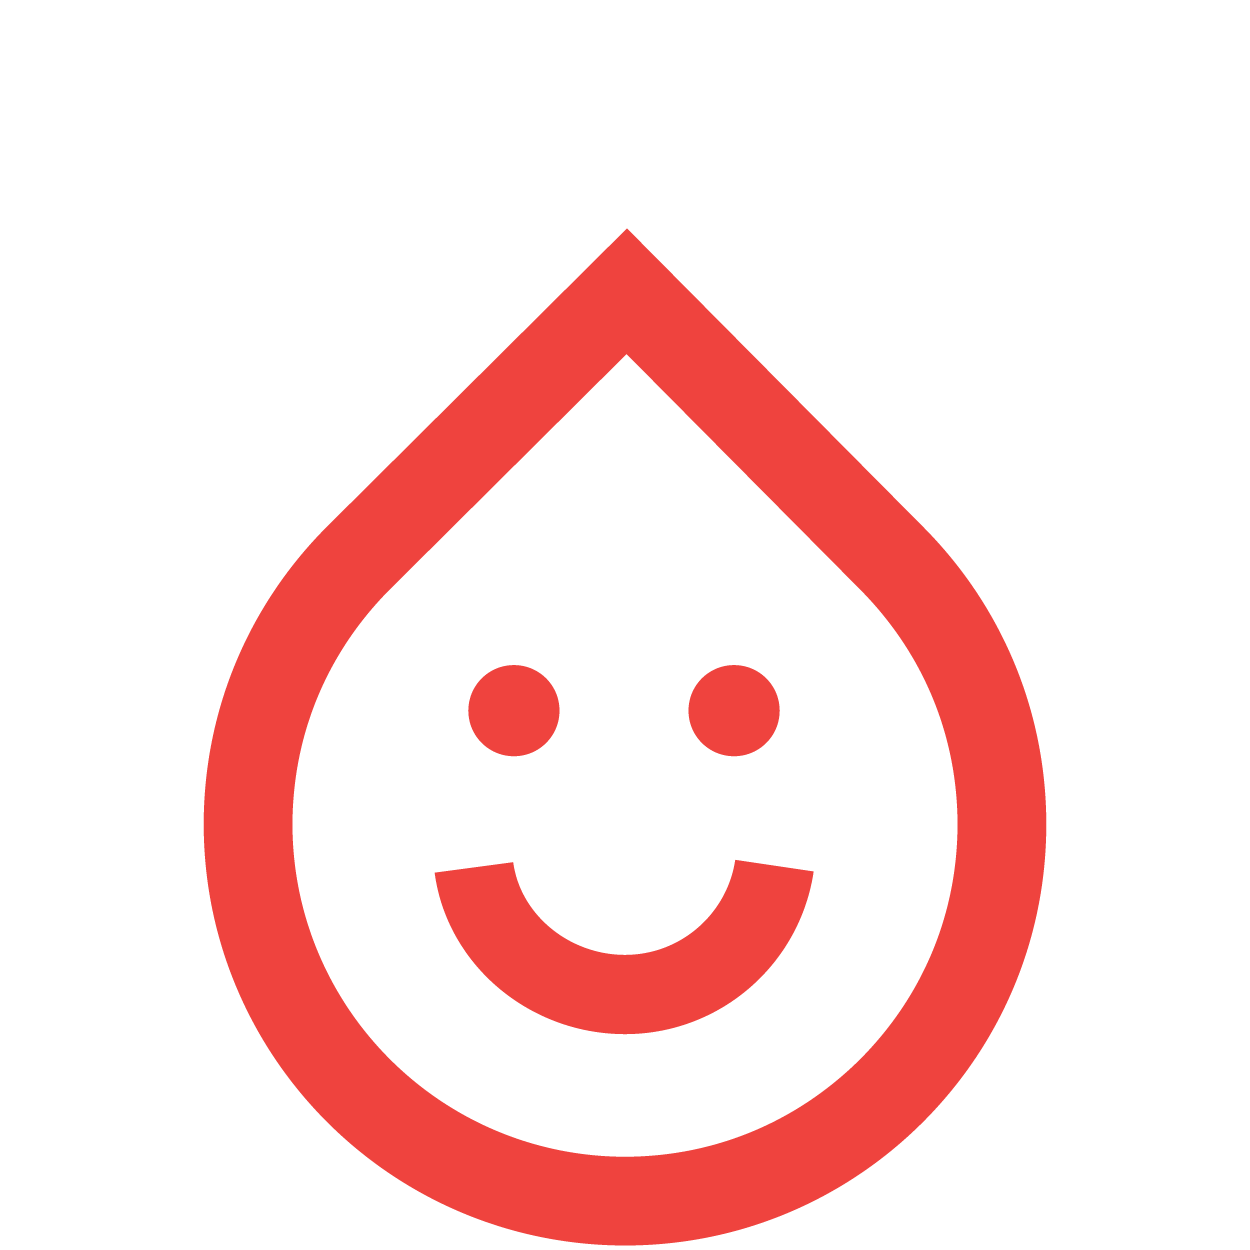 Drop_icon_Smiley_Outline_Happy_RGB_V2.png (30 KB)